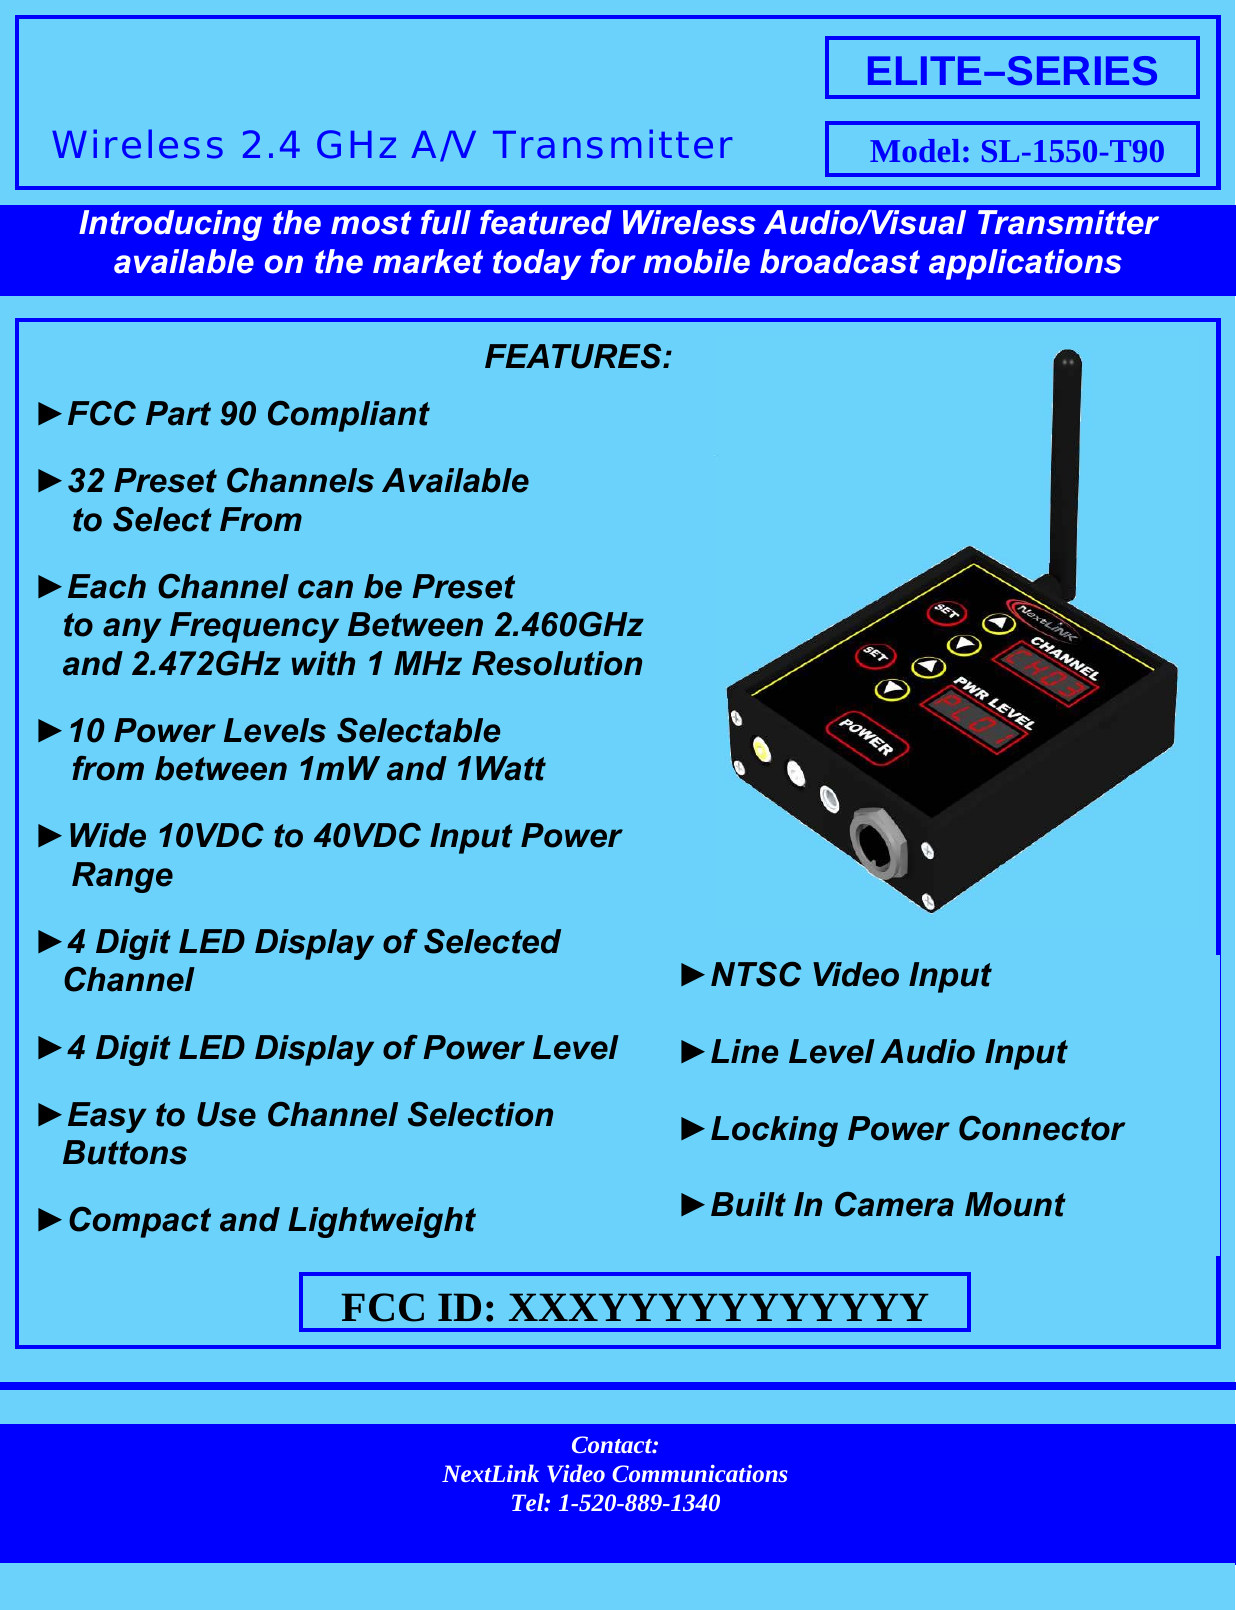                                                     FEATURES:  ►FCC Part 90 Compliant   ►32 Preset Channels Available     to Select From  ►Each Channel can be Preset    to any Frequency Between 2.460GHz    and 2.472GHz with 1 MHz Resolution   ►10 Power Levels Selectable      from between 1mW and 1Watt  ►Wide 10VDC to 40VDC Input Power      Range  ►4 Digit LED Display of Selected     Channel  ►4 Digit LED Display of Power Level  ►Easy to Use Channel Selection    Buttons  ►Compact and Lightweight   ELITE–SERIES  Model: SL-1550-T90  Contact: NextLink Video Communications Tel: 1-520-889-1340  Introducing the most full featured Wireless Audio/Visual Transmitter  available on the market today for mobile broadcast applications Wireless 2.4 GHz A/V Transmitter  ►NTSC Video Input  ►Line Level Audio Input  ►Locking Power Connector  ►Built In Camera Mount FCC ID: XXXYYYYYYYYYYY 